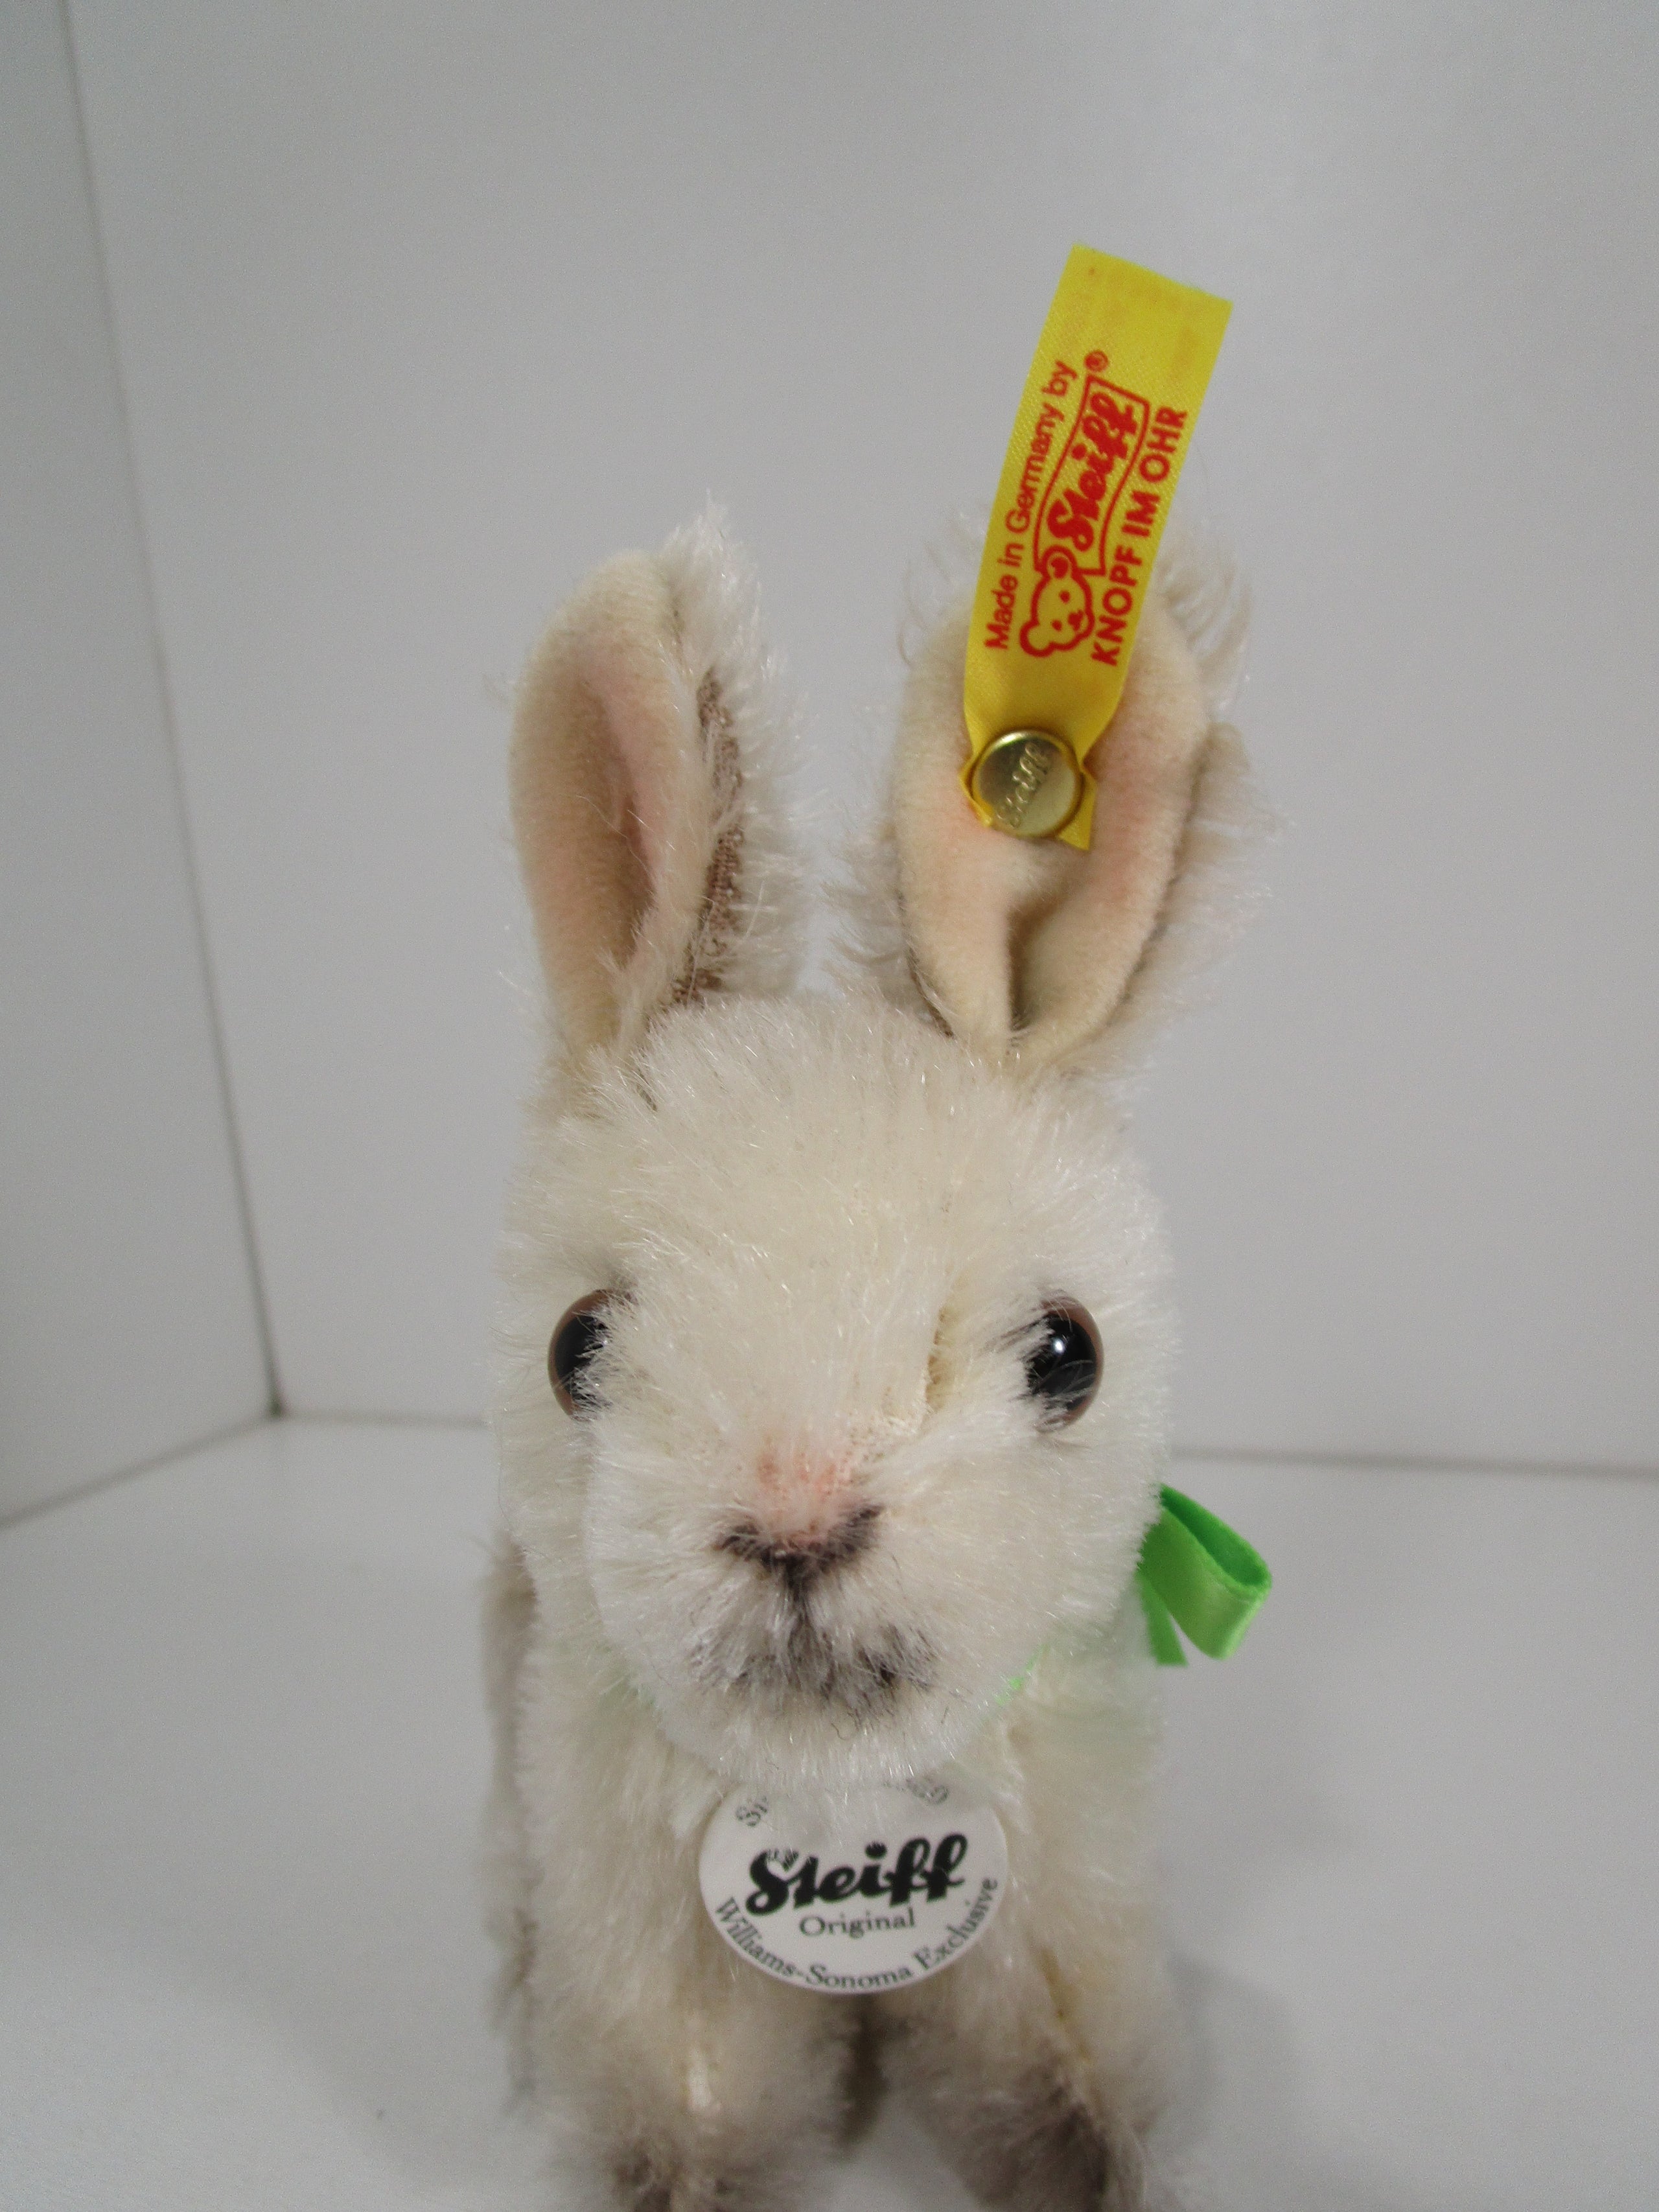 Steiff Sitting Mohair Rabbit Exclusive For Williams Sonoma With All IDs